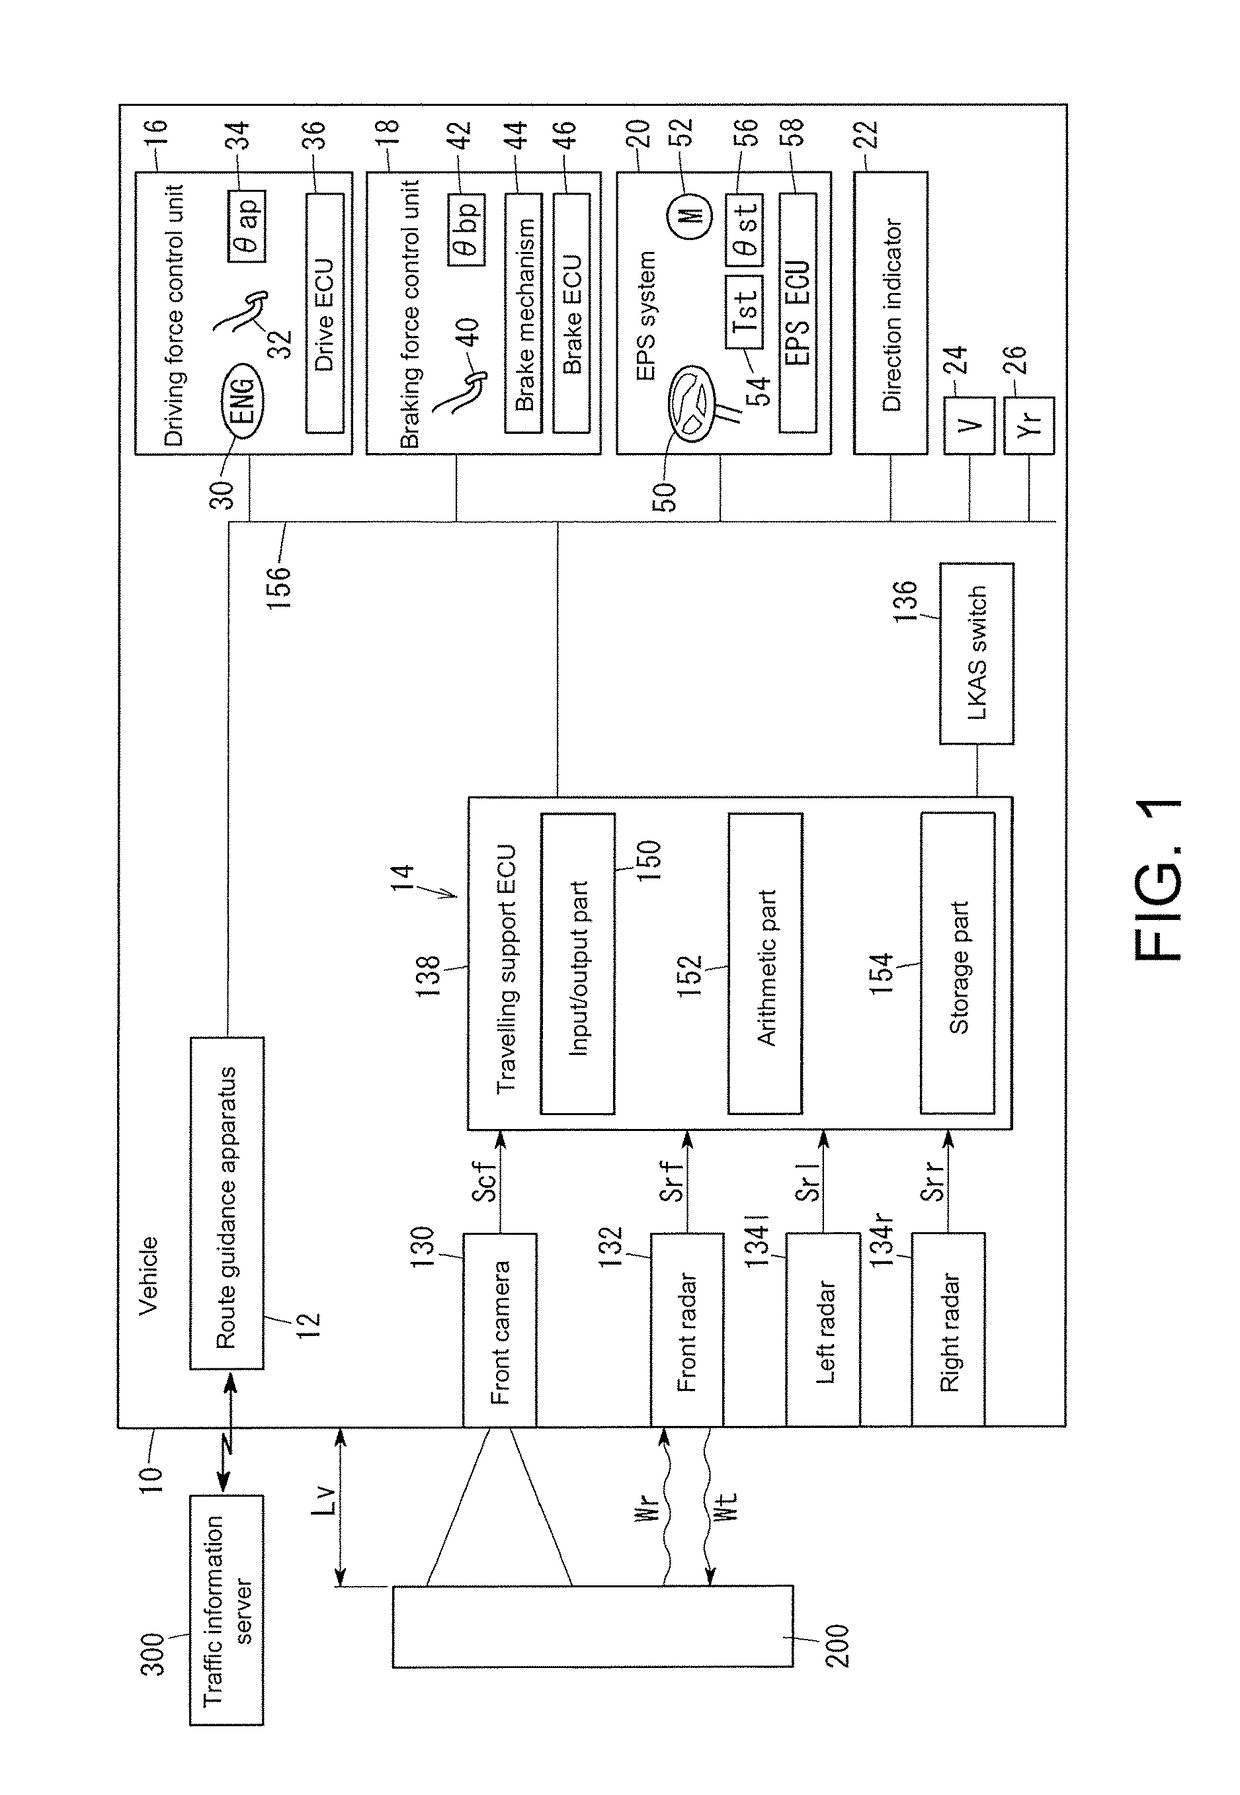 Route guidance apparatus and route guidance method